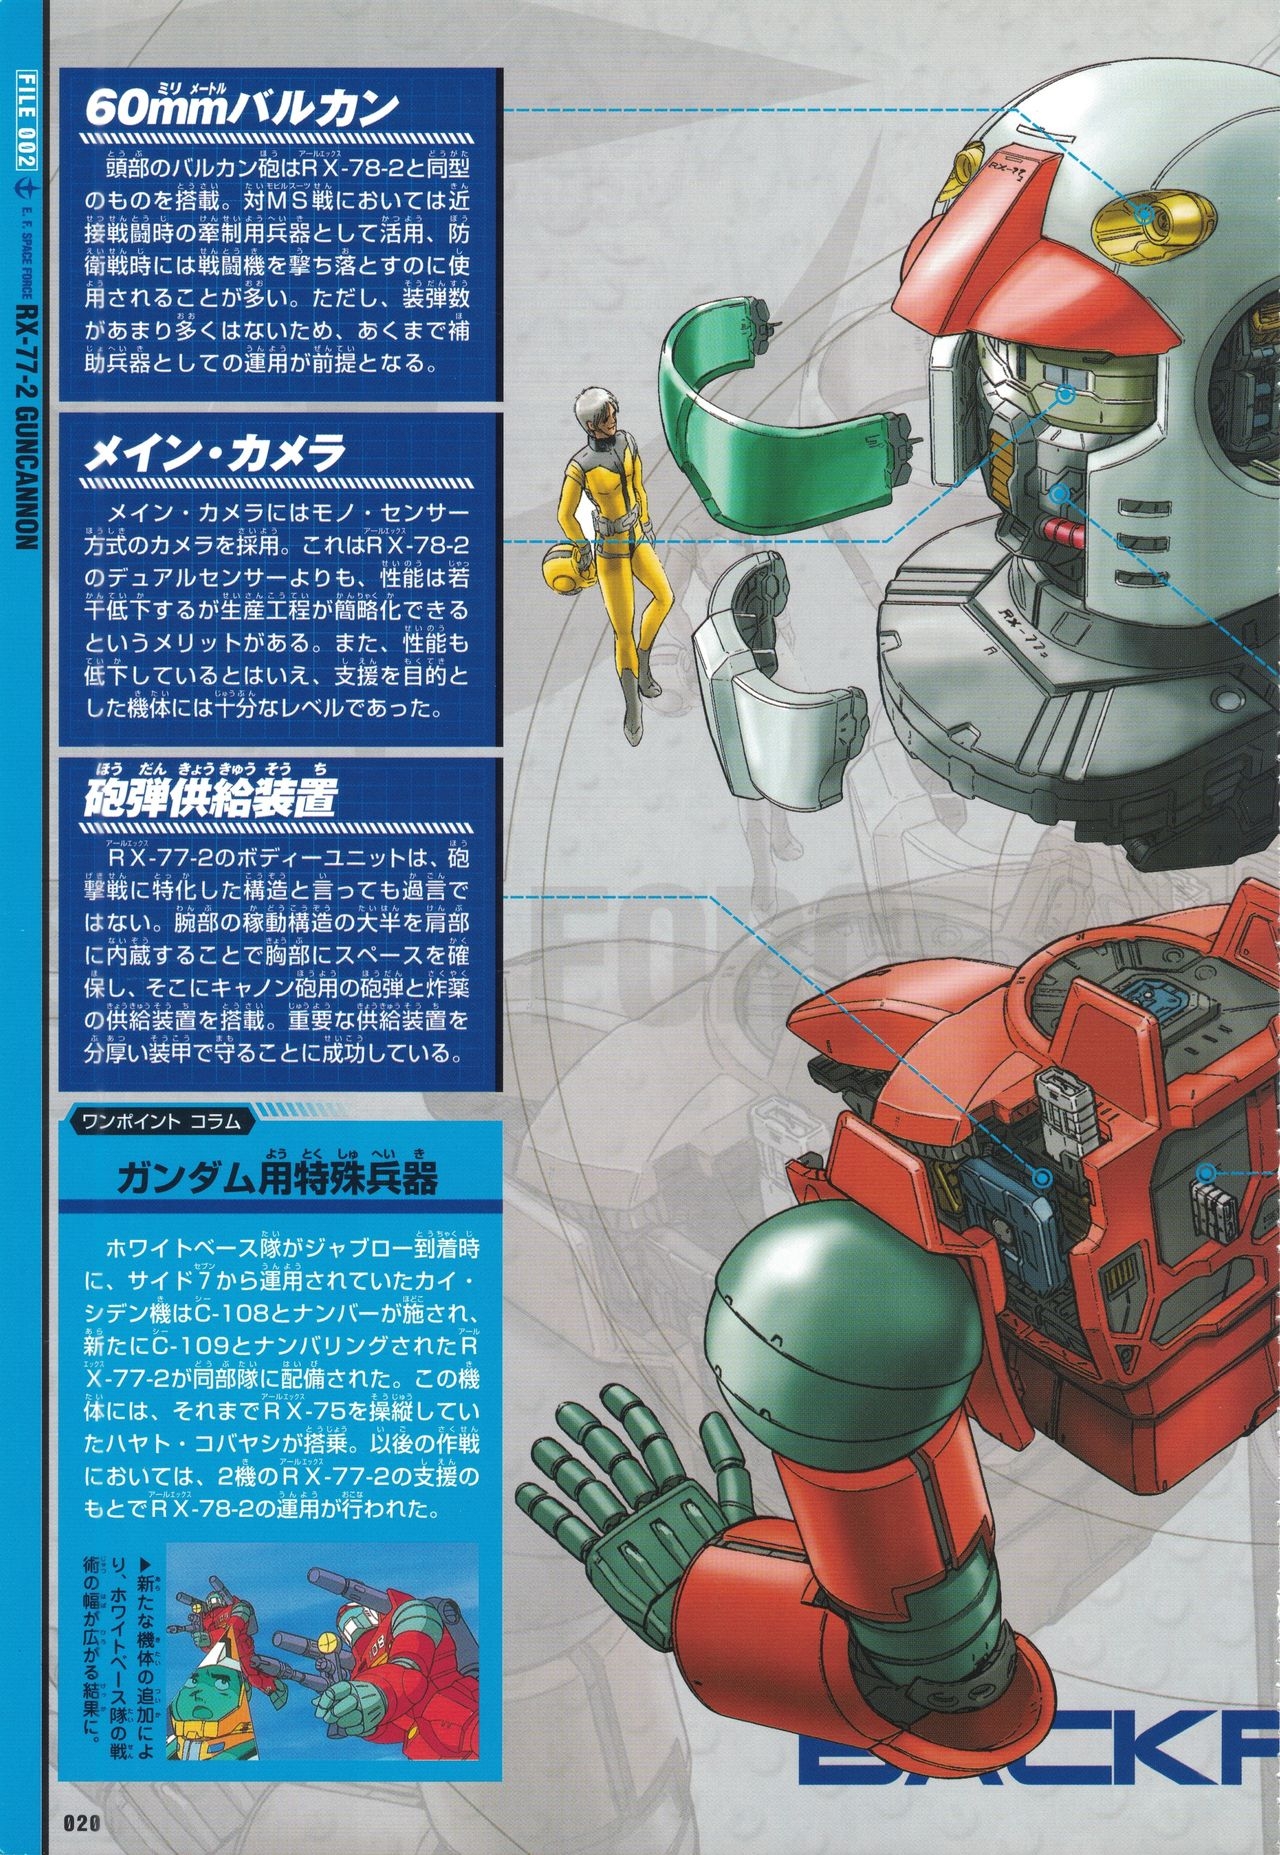 Mobile Suit Gundam - New Cross-Section Book - One Year War Edition 22